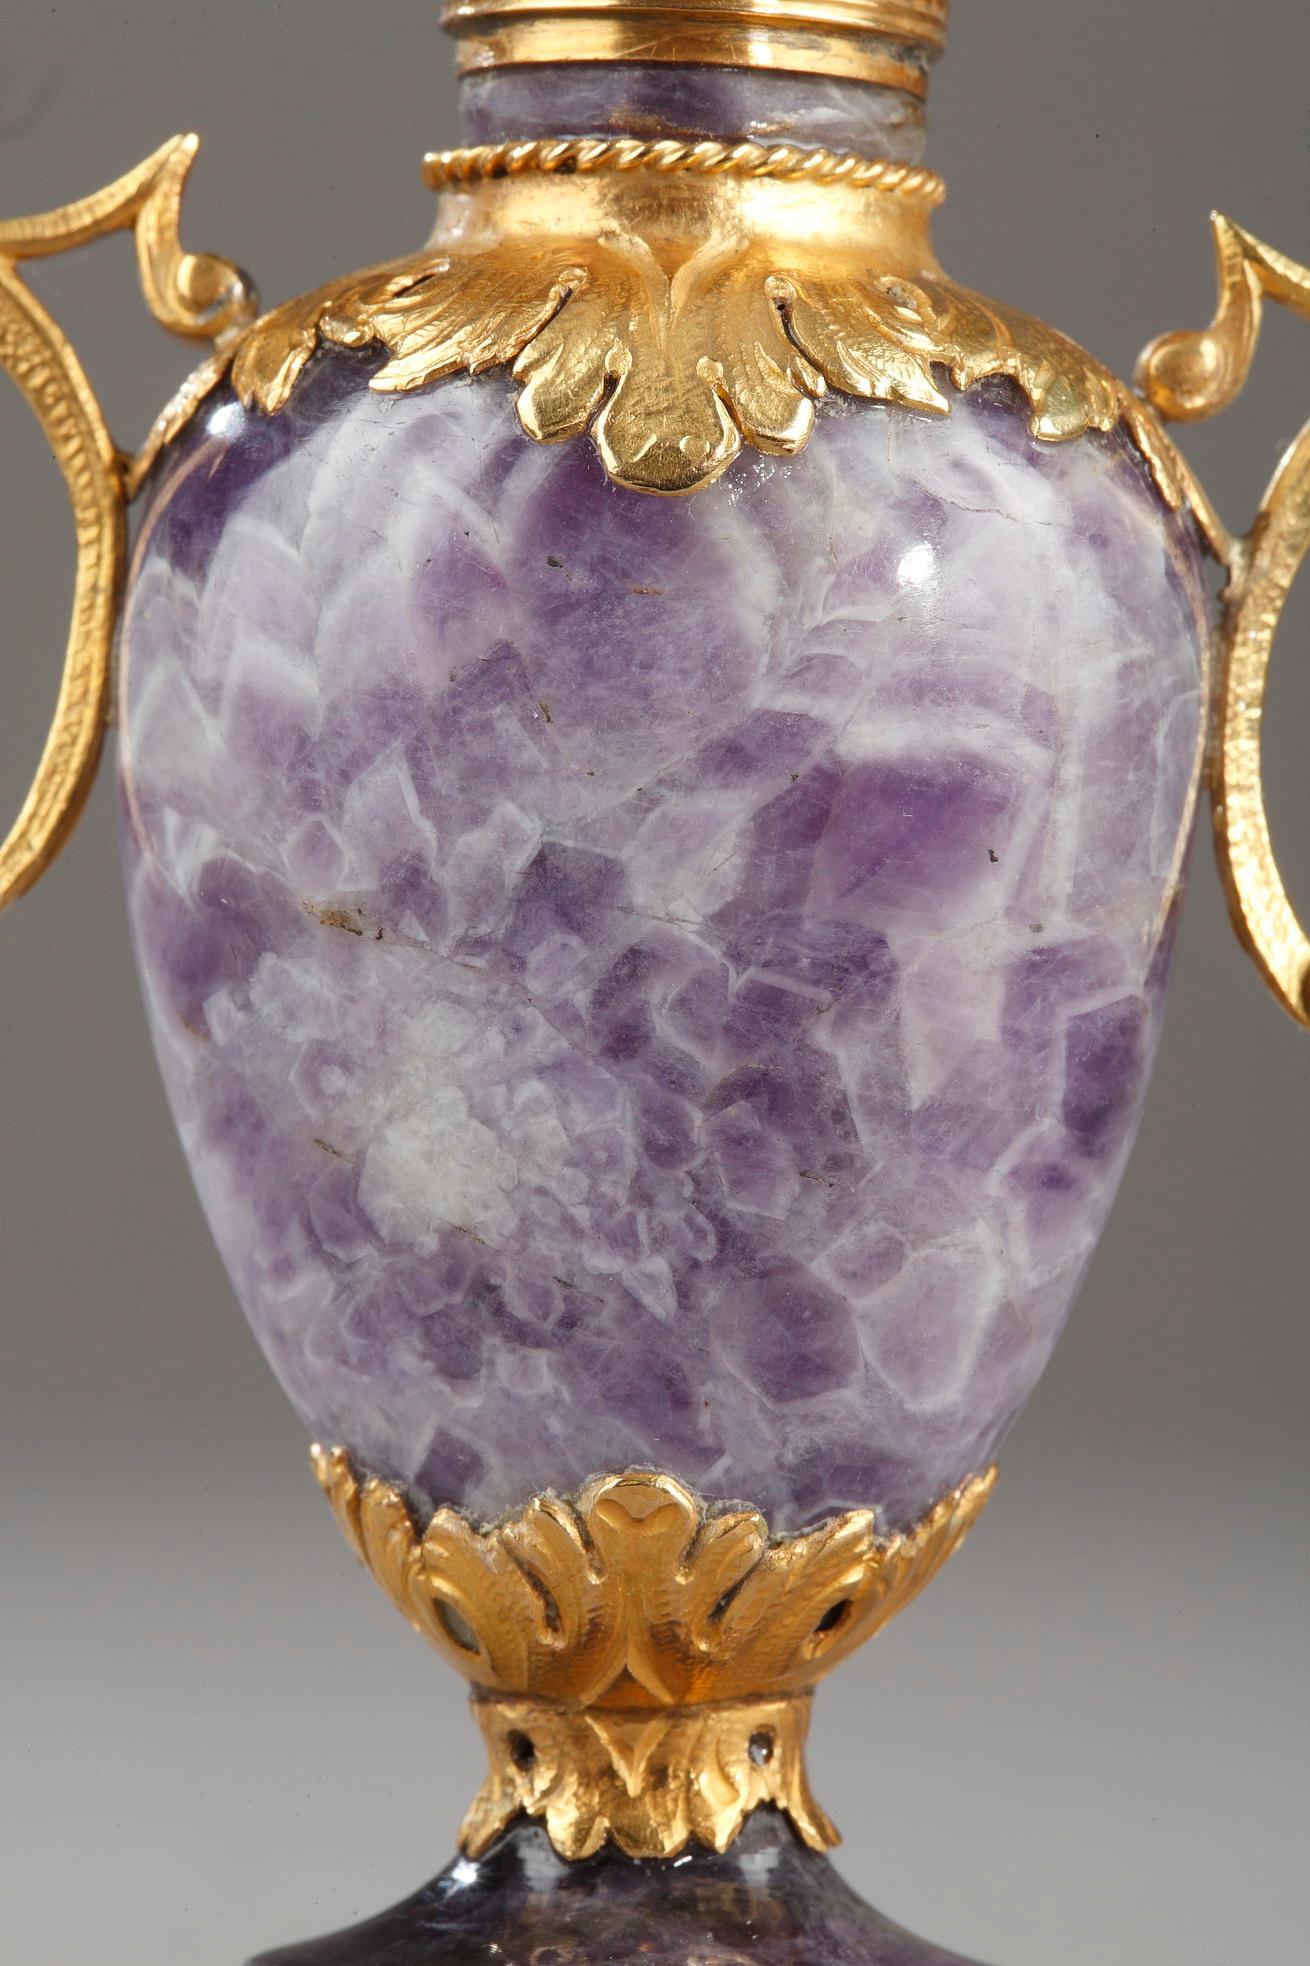 Antique Cushion Cut Gold and Amethyst Perfum Flask, Early 19th Century